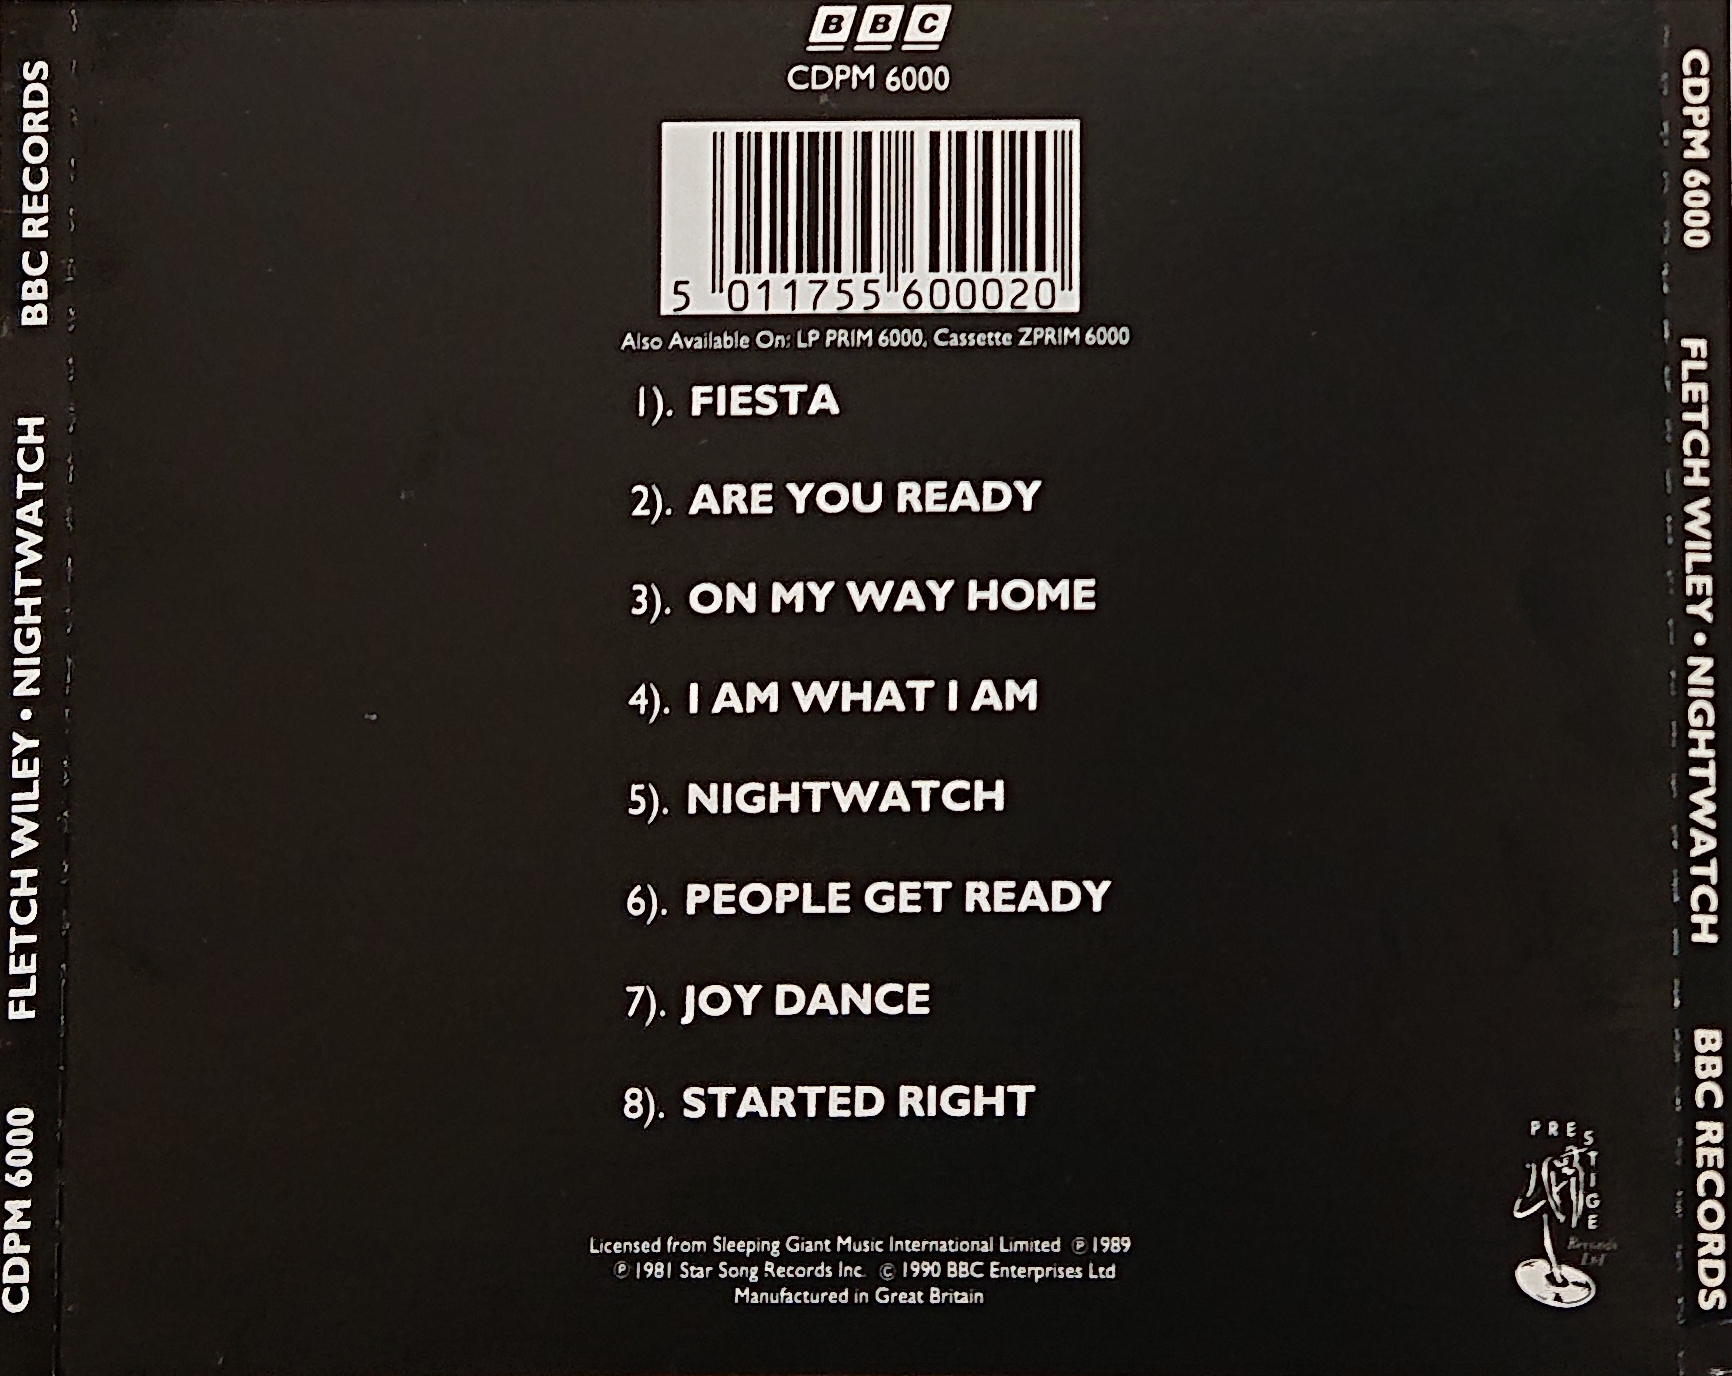 Back cover of CDPM 6000